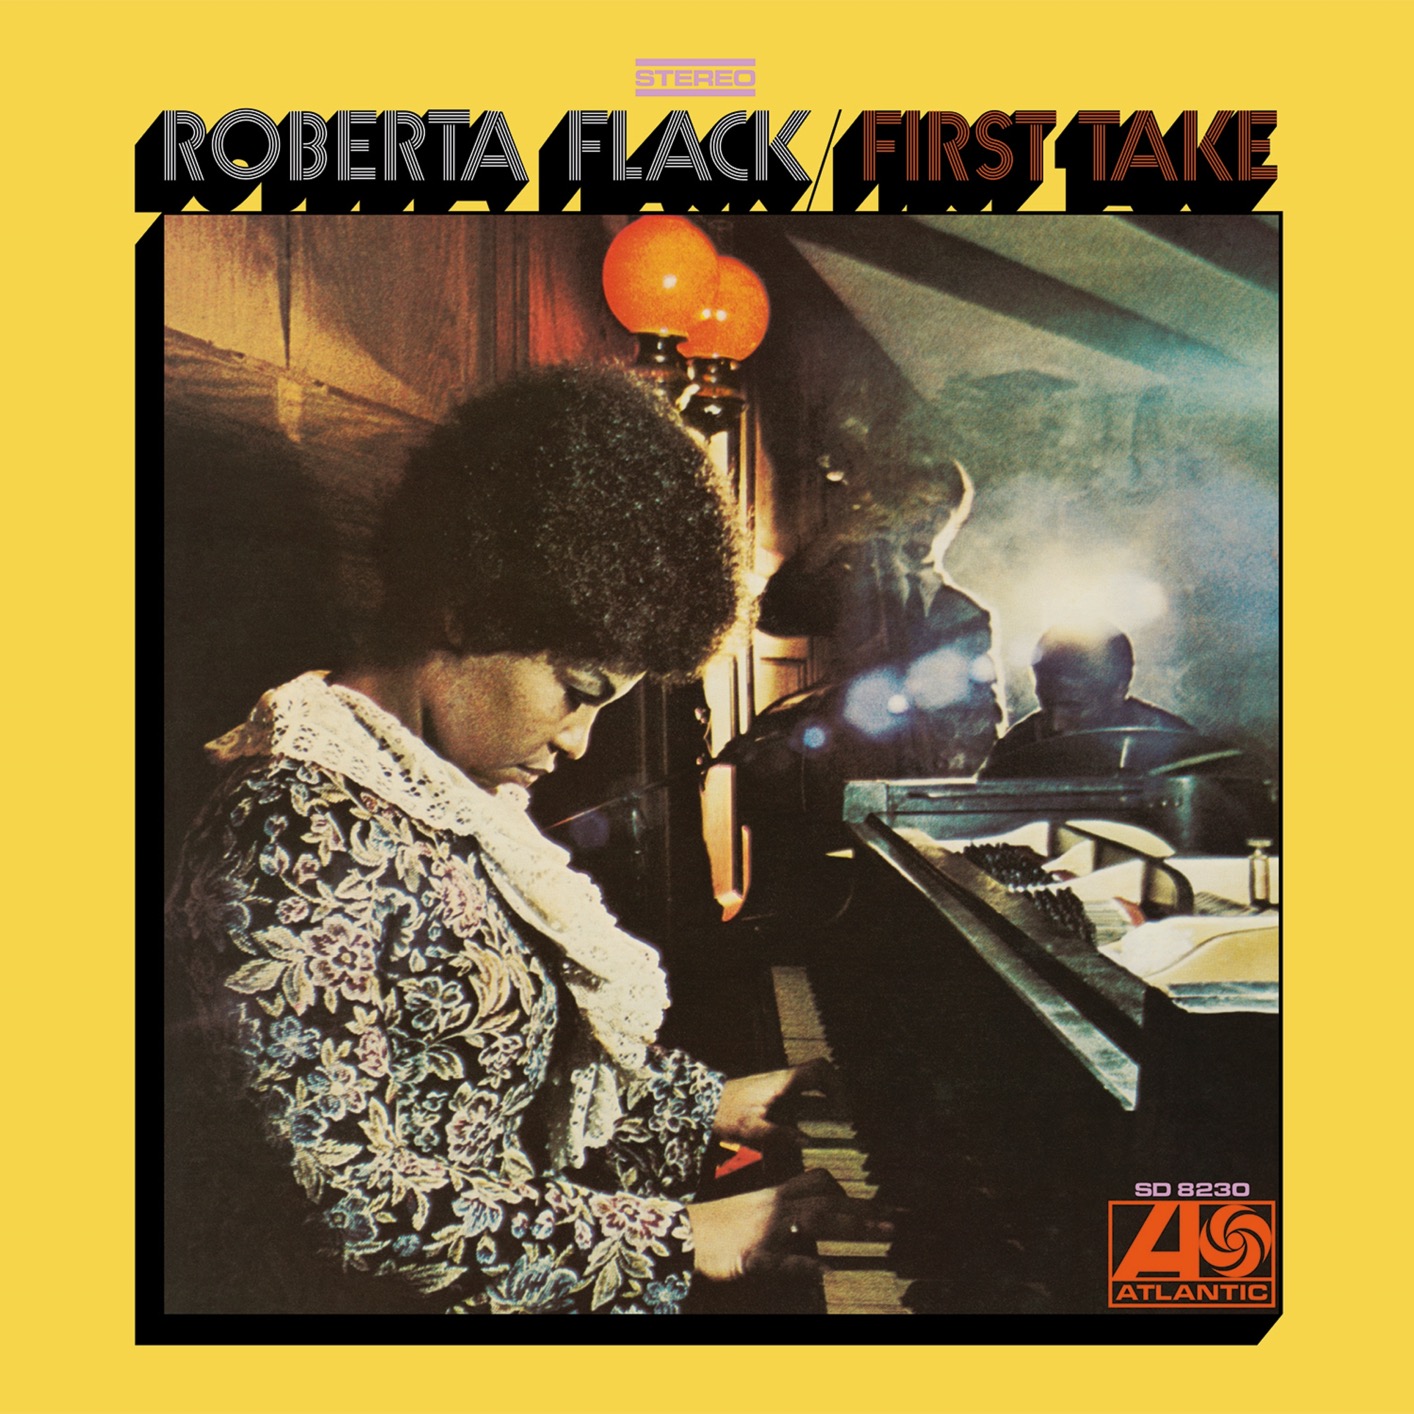 Roberta Flack - First Take - Deluxe Edition [24-192] 2cd